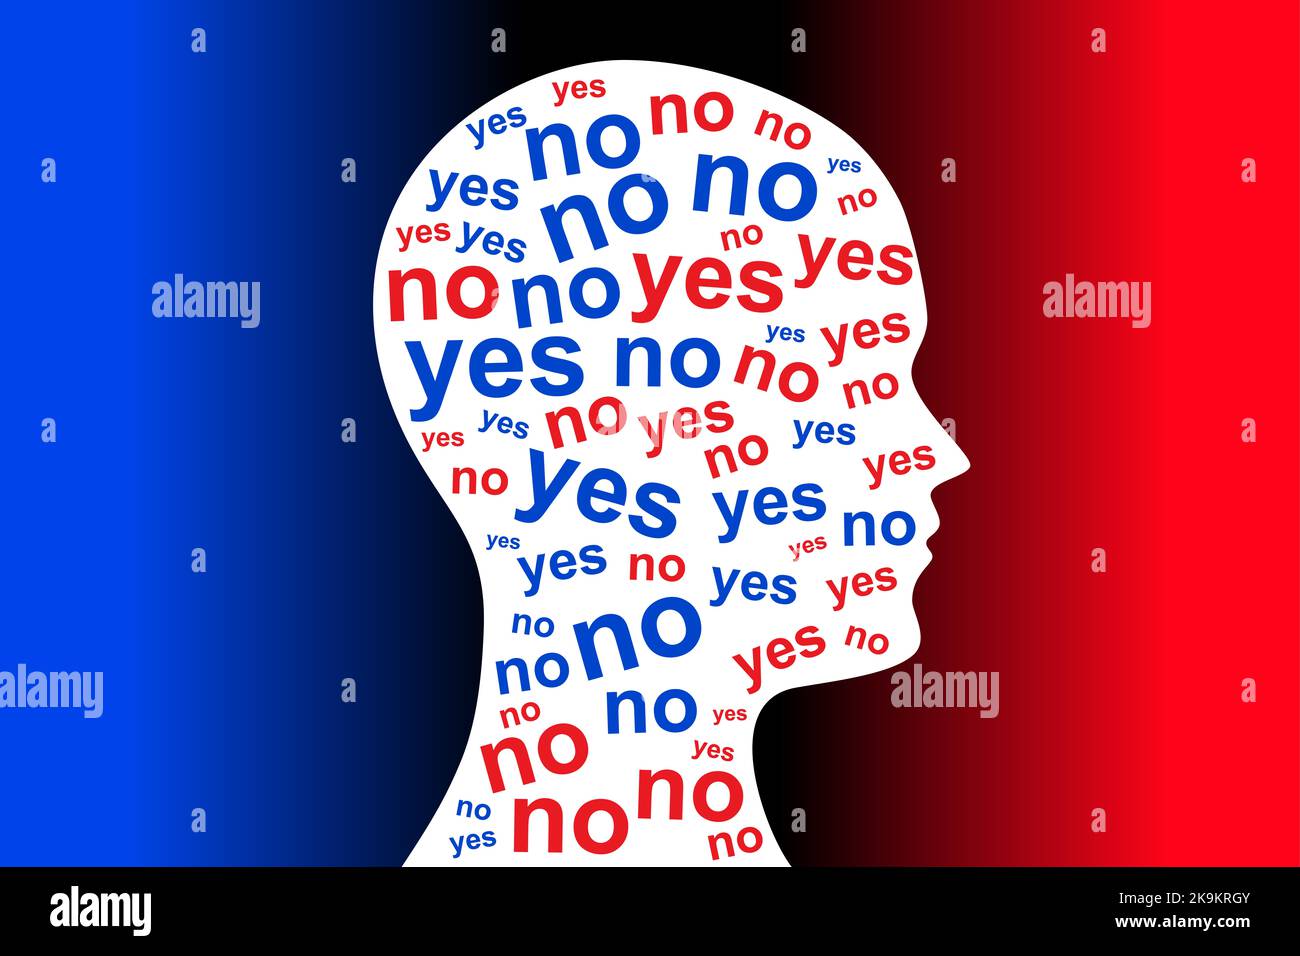 YES and NO words colored red and blue in a white silhouette of a head, over a gradient background. Symbol for the uncertainty of which side to choose. Stock Photo